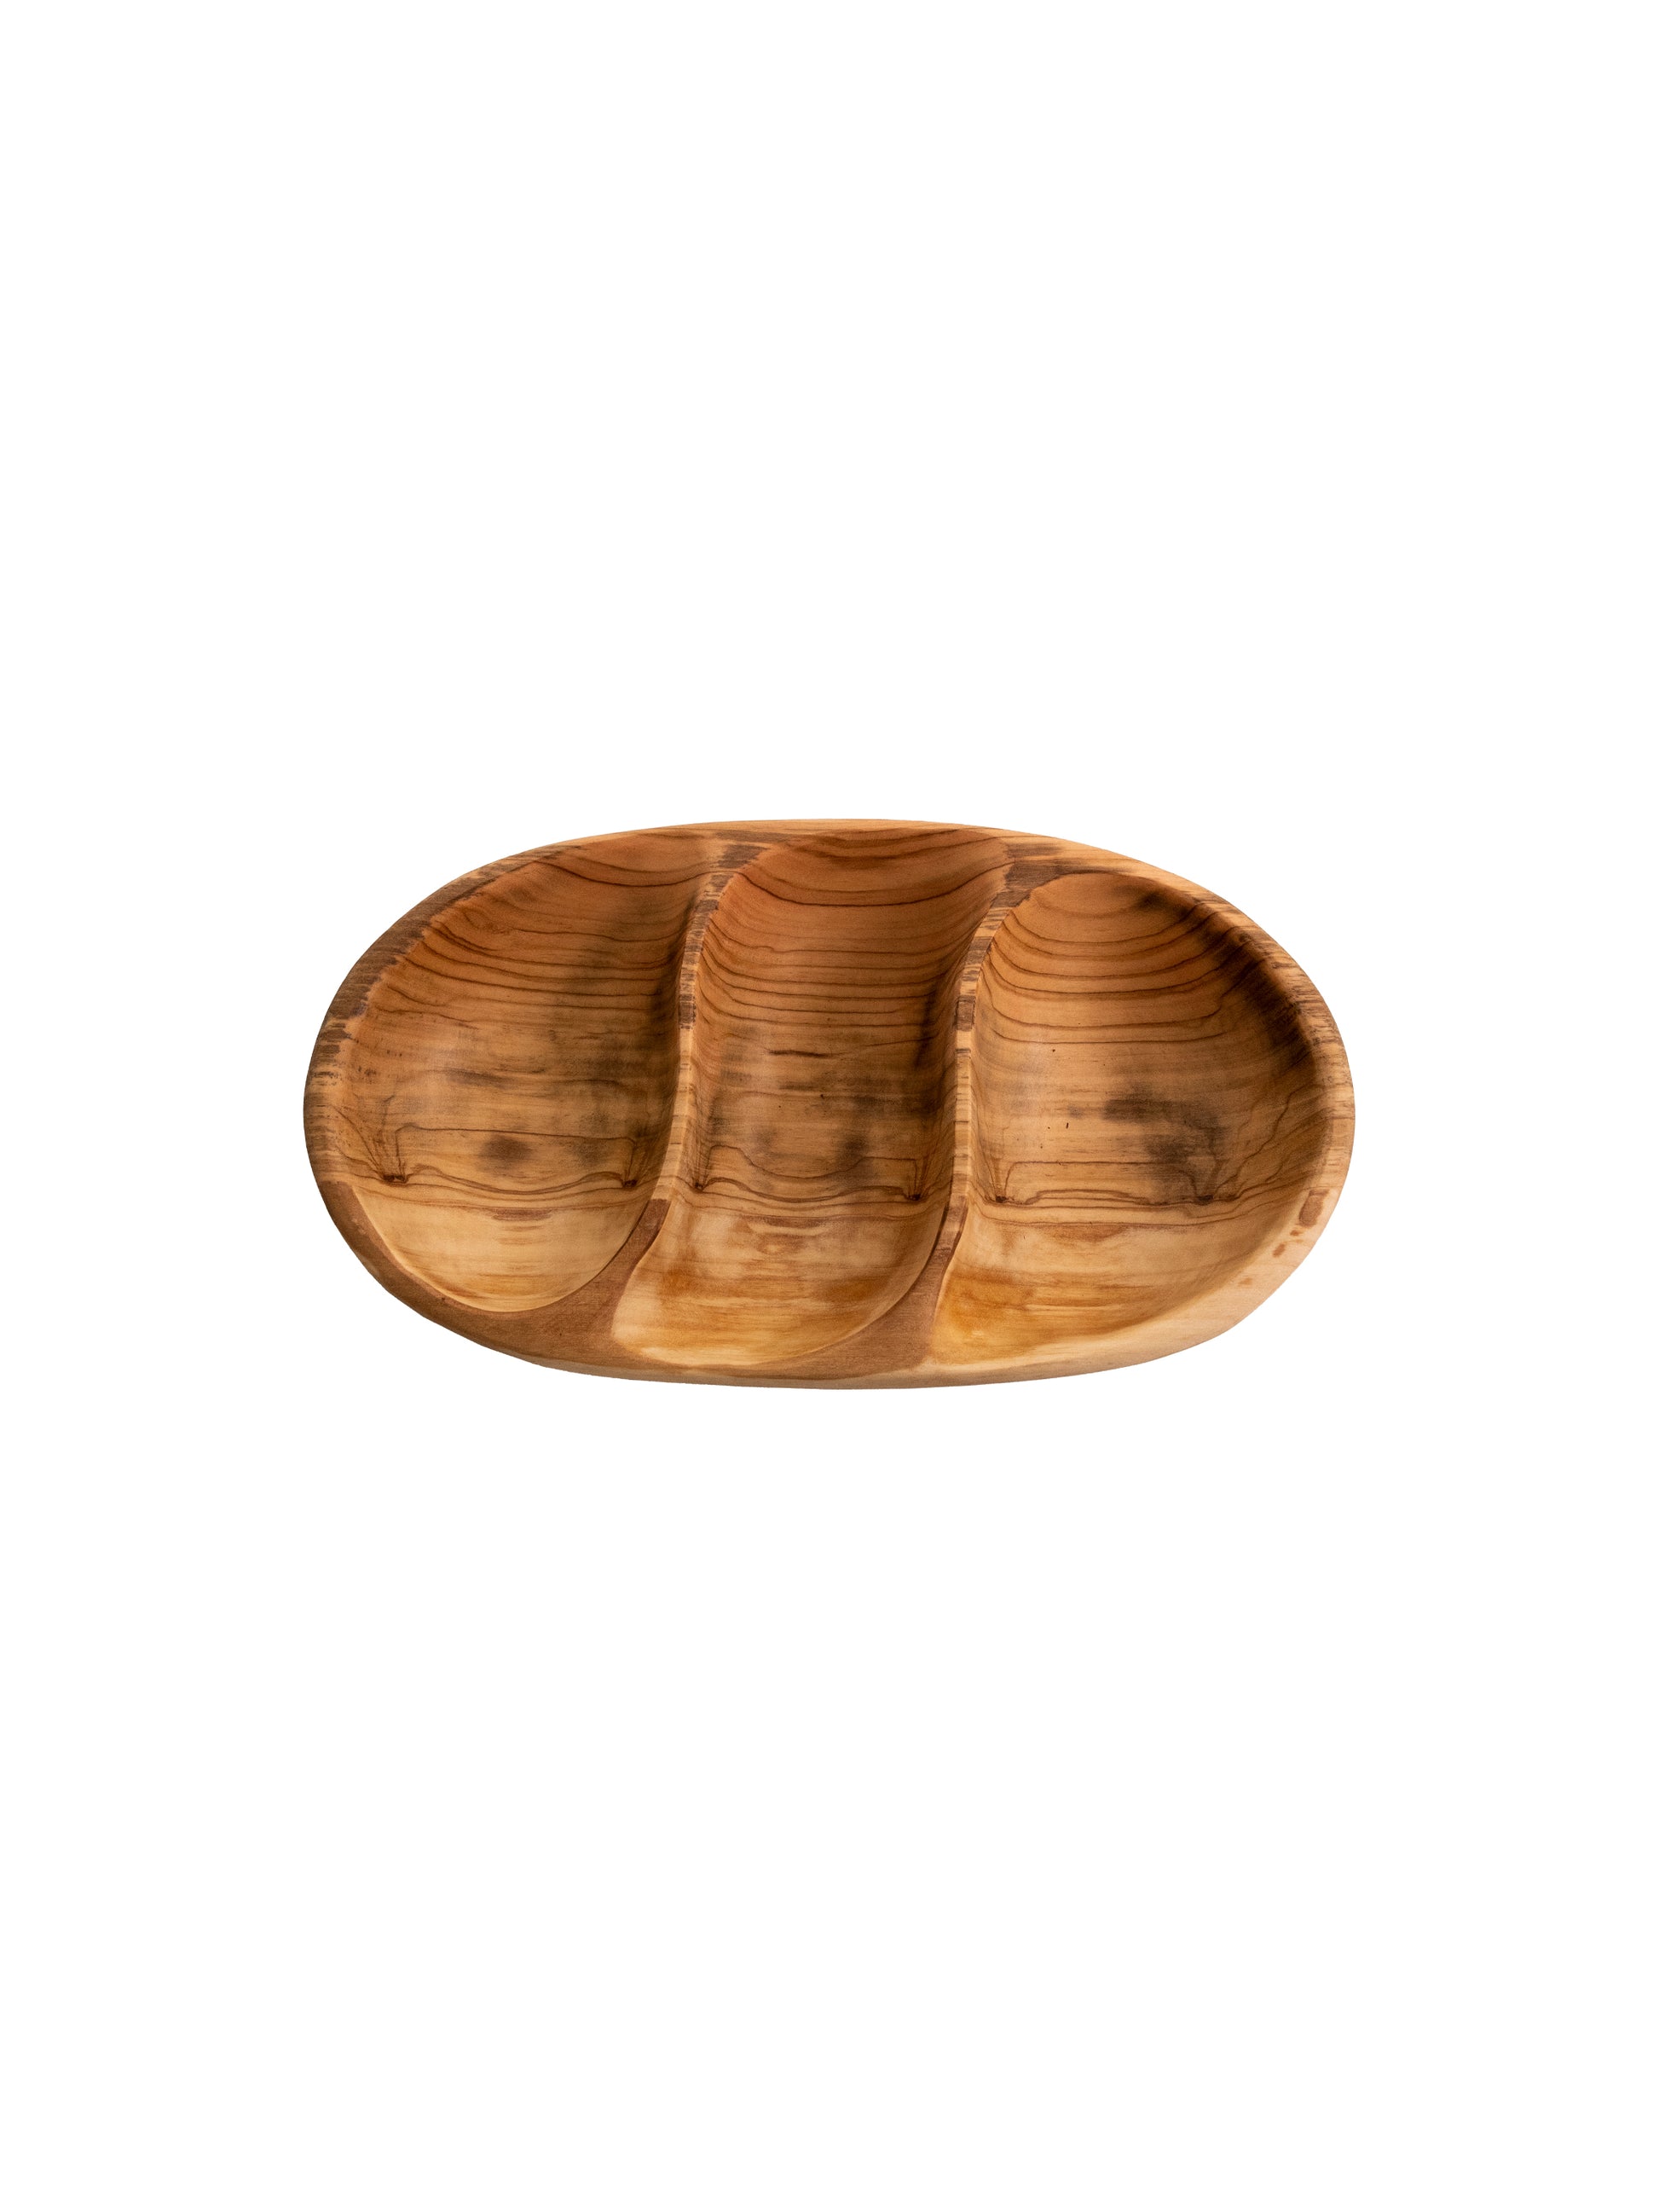 WT Olive Wood Bowl Divided Serving Dish Weston Table